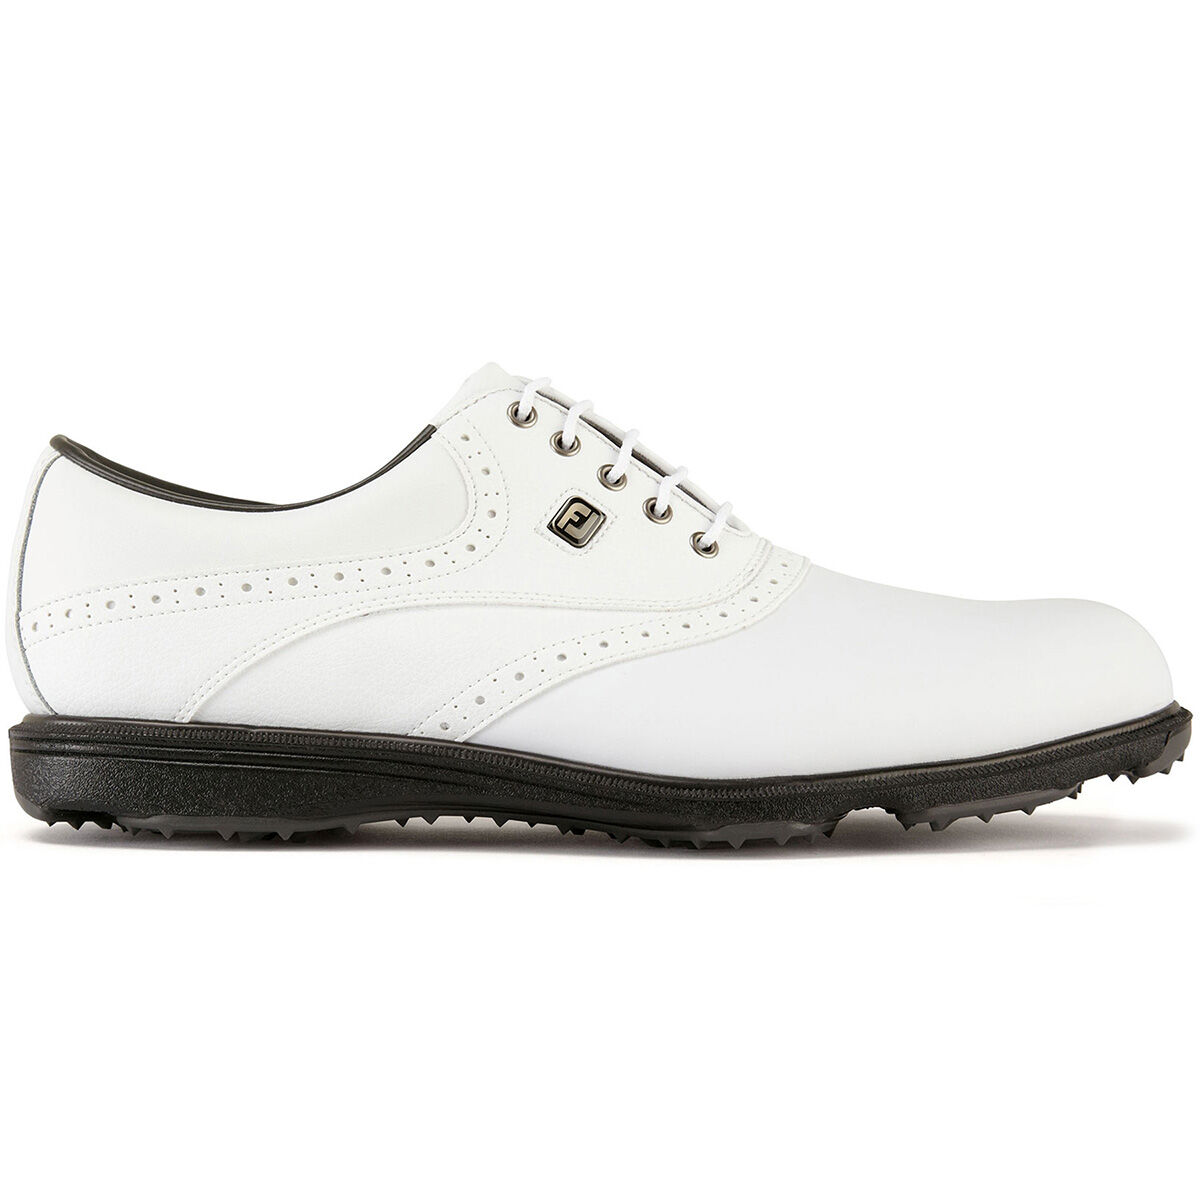 FootJoy Hydrolite 2 Shoes from american 